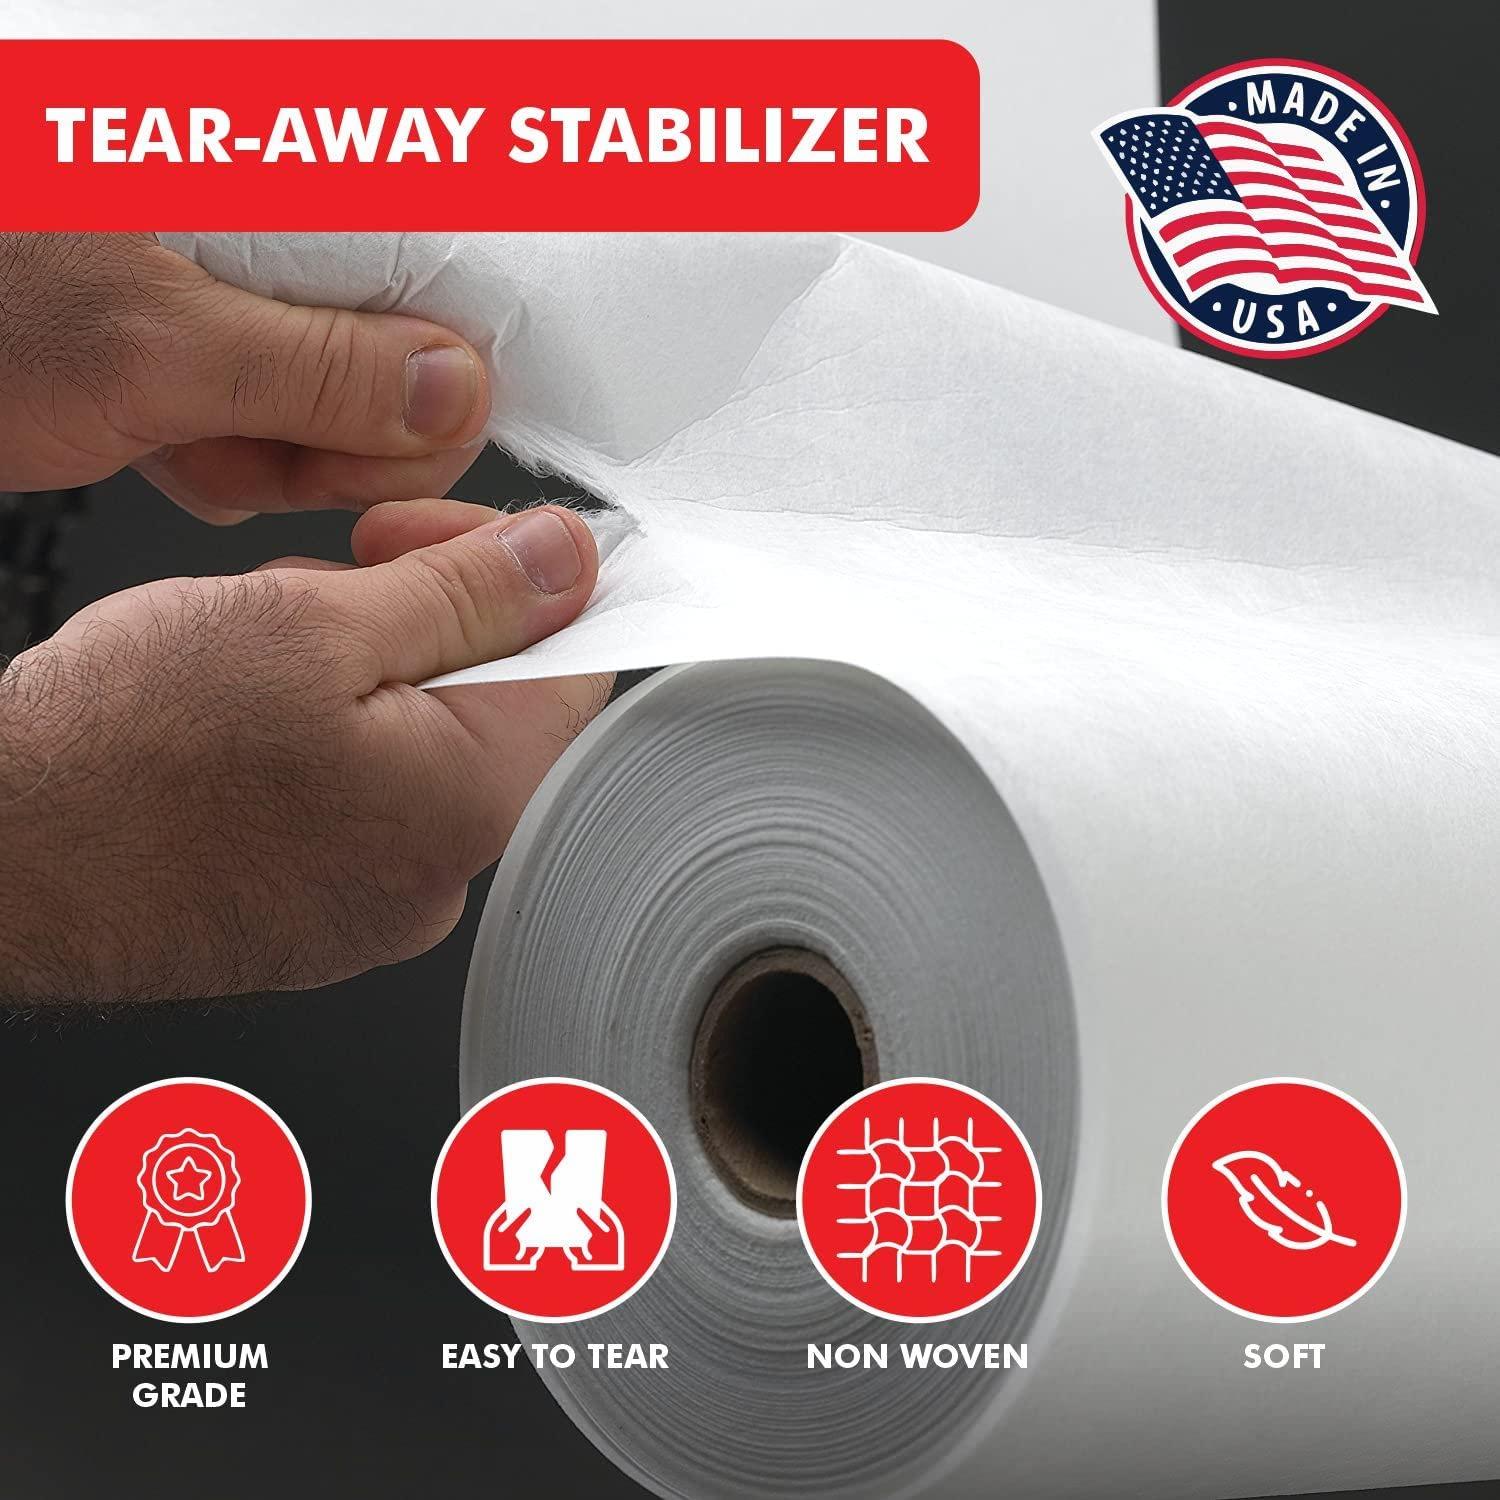 Cut Away Stabilizer White 2.0 oz 15 inch x 100 Yard Roll. SuperStable Embroidery Stabilizer Backing